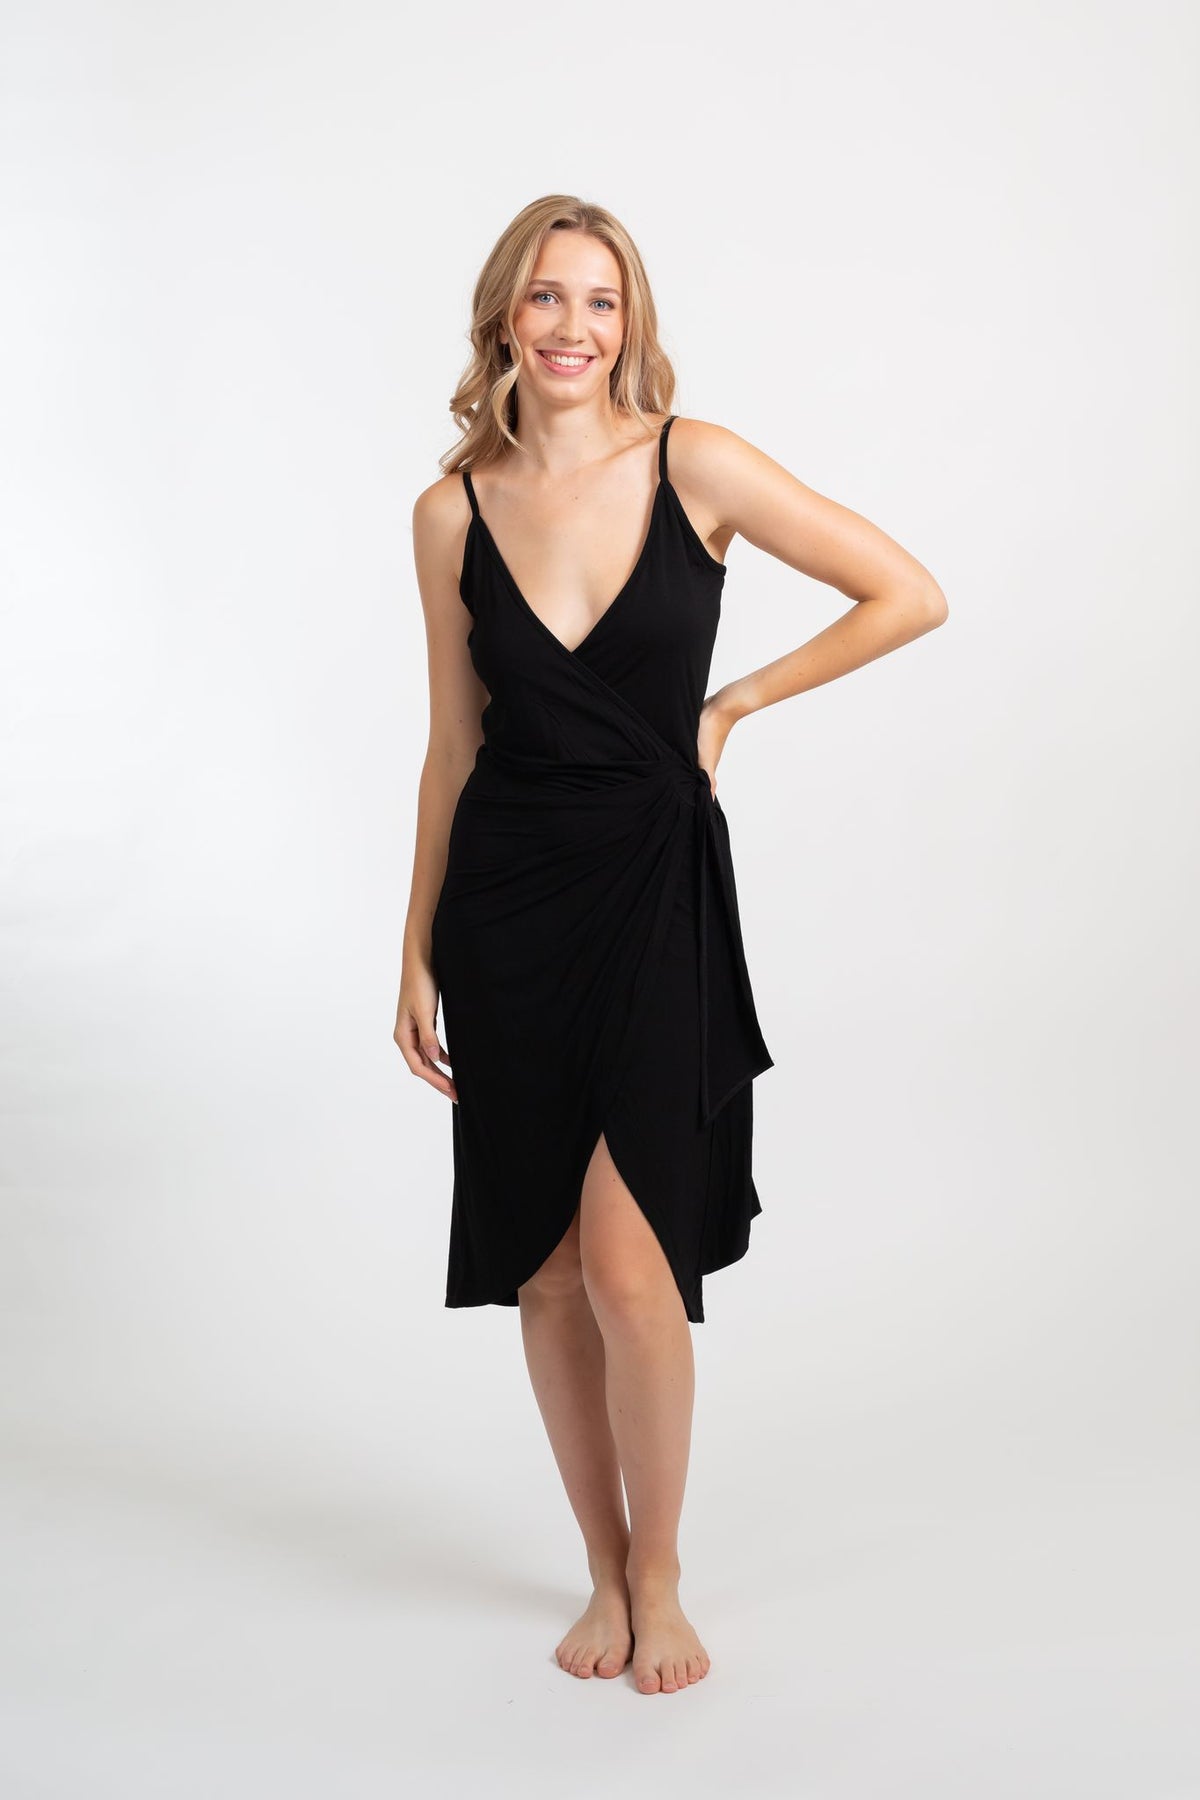 the front of a blonde hair woman model wearing a strappy black dress that has a small cut in the middle with one hand on her hip